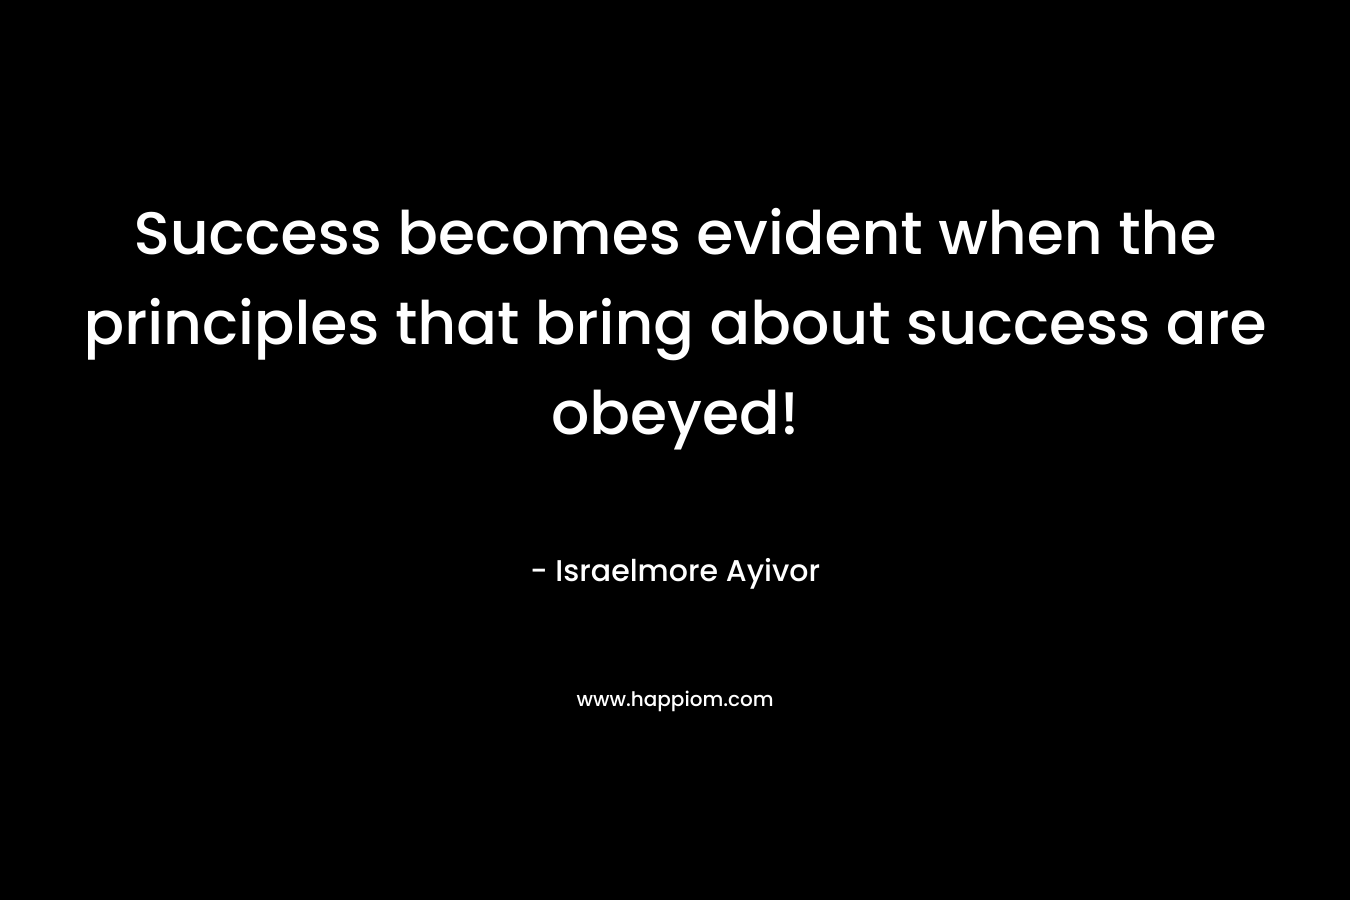 Success becomes evident when the principles that bring about success are obeyed! – Israelmore Ayivor